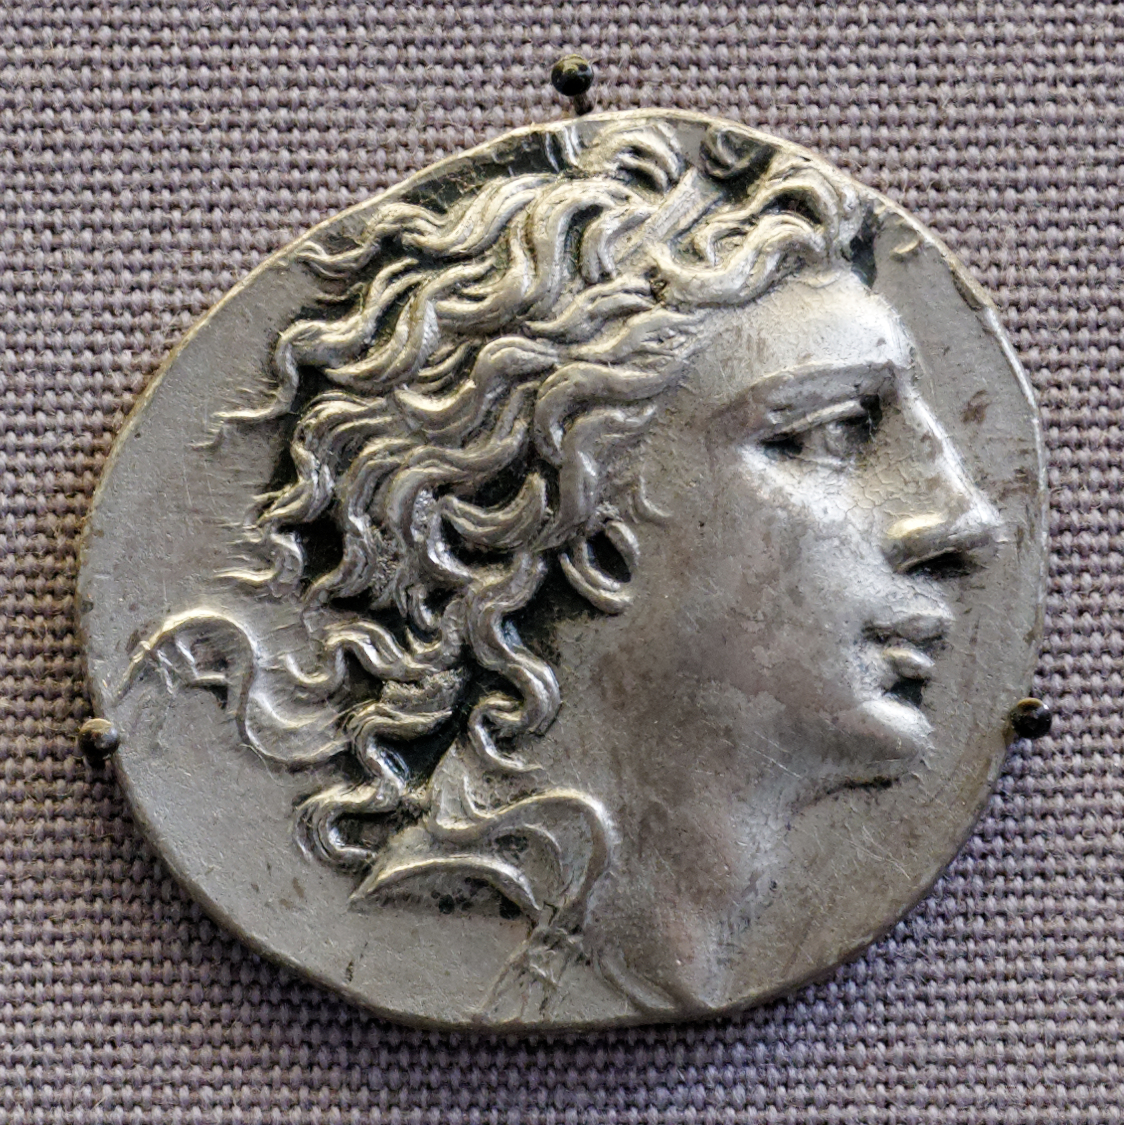 A coin featuring King Mithridates VI of Pontus. Courtesy Wikimedia Commons.